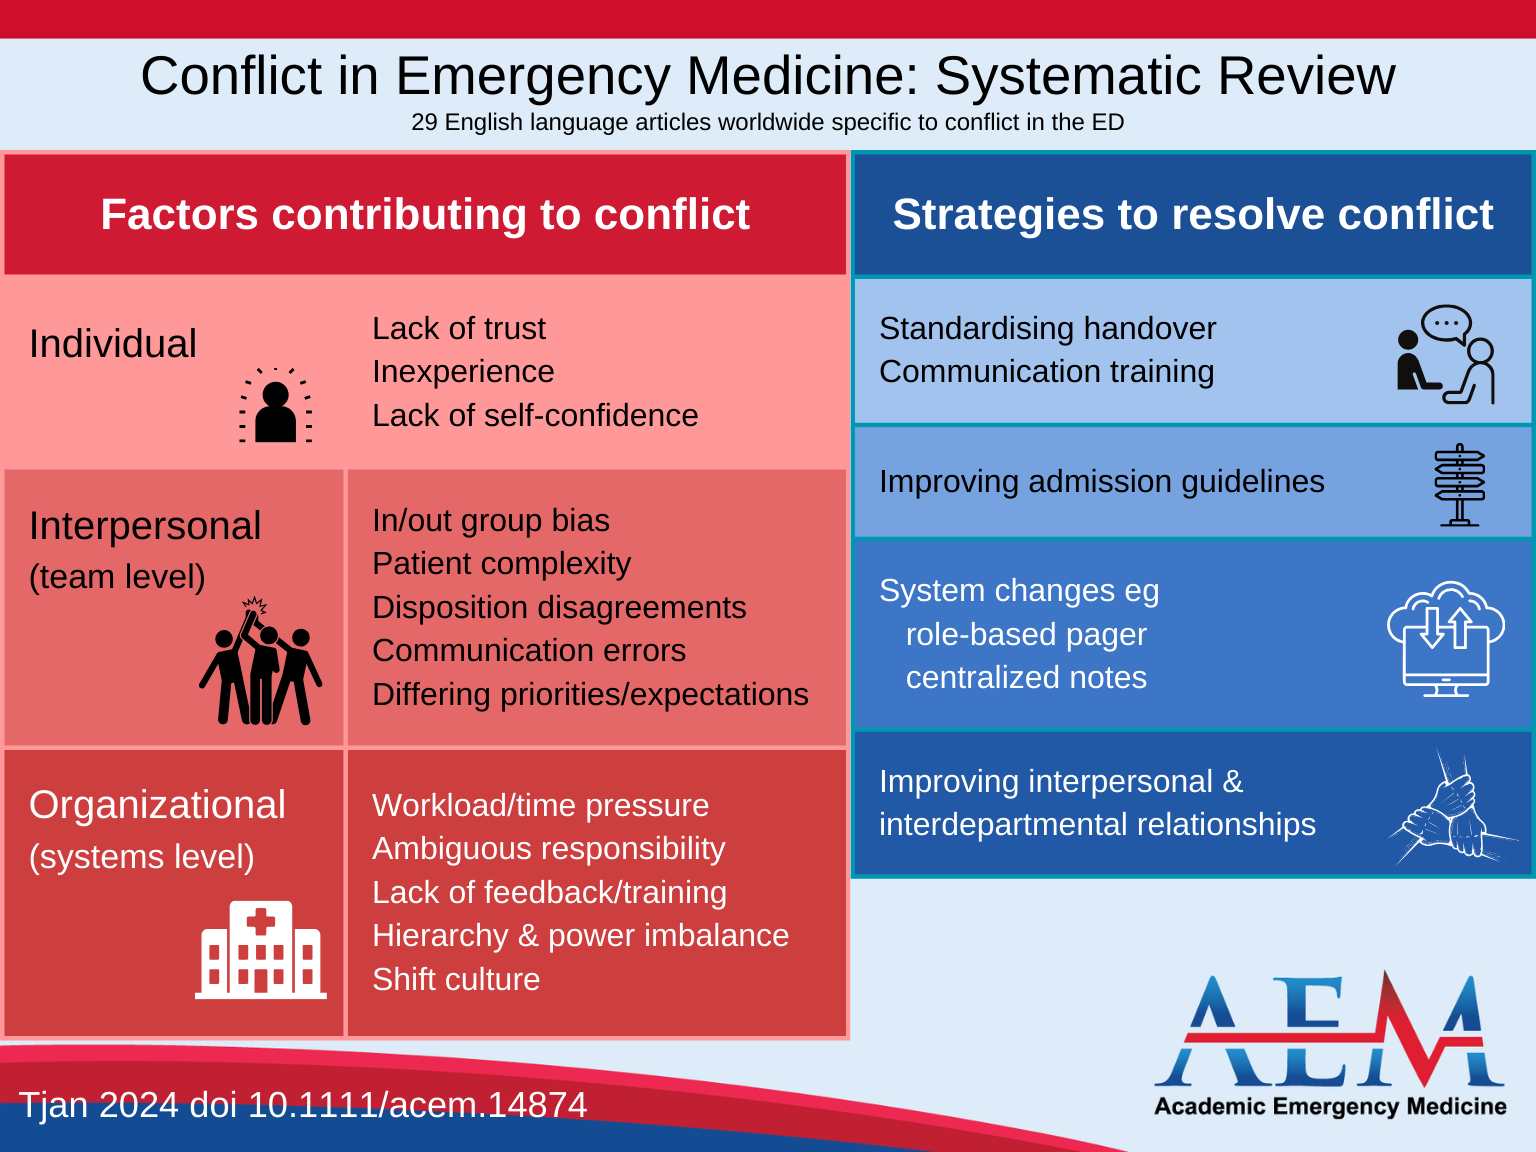 AEM infographic on conflict in emergency medicine